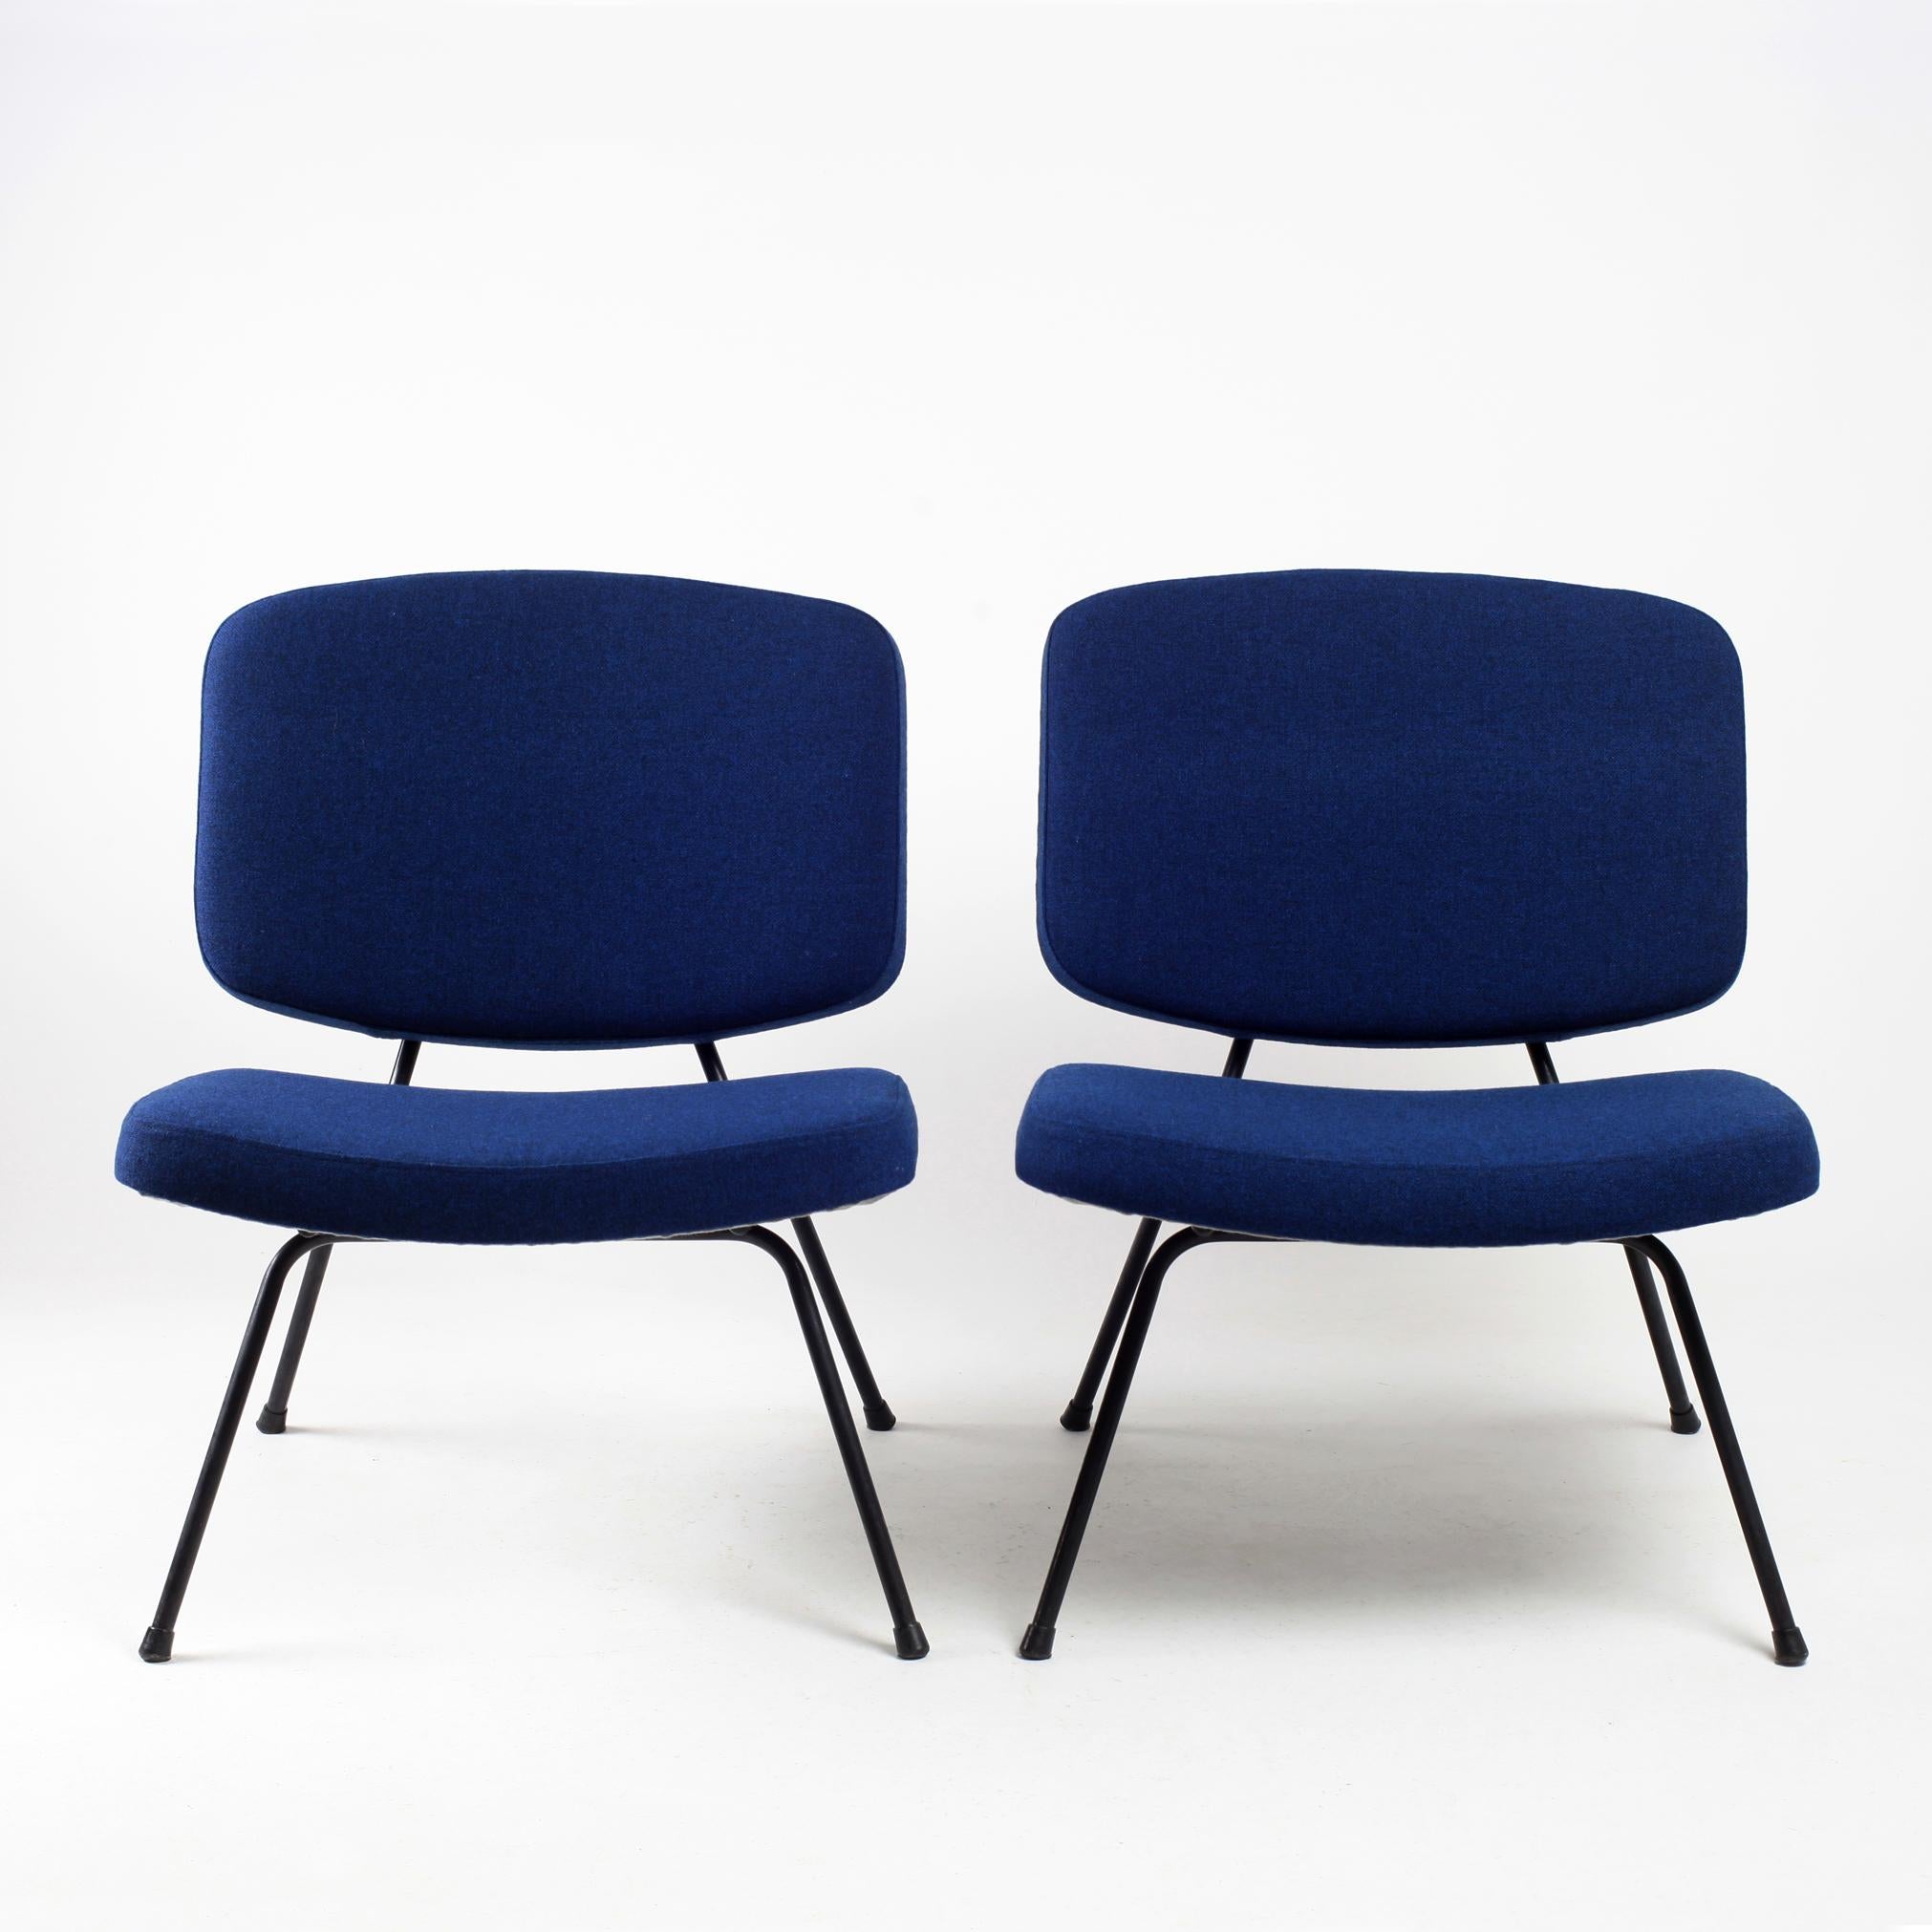 Pair of low chairs CM190 by Pierre Paulin designed in 1950 for Thonet.
Black tubular steel structure
Reupholstered in a blue Kvadrat fabric.
 